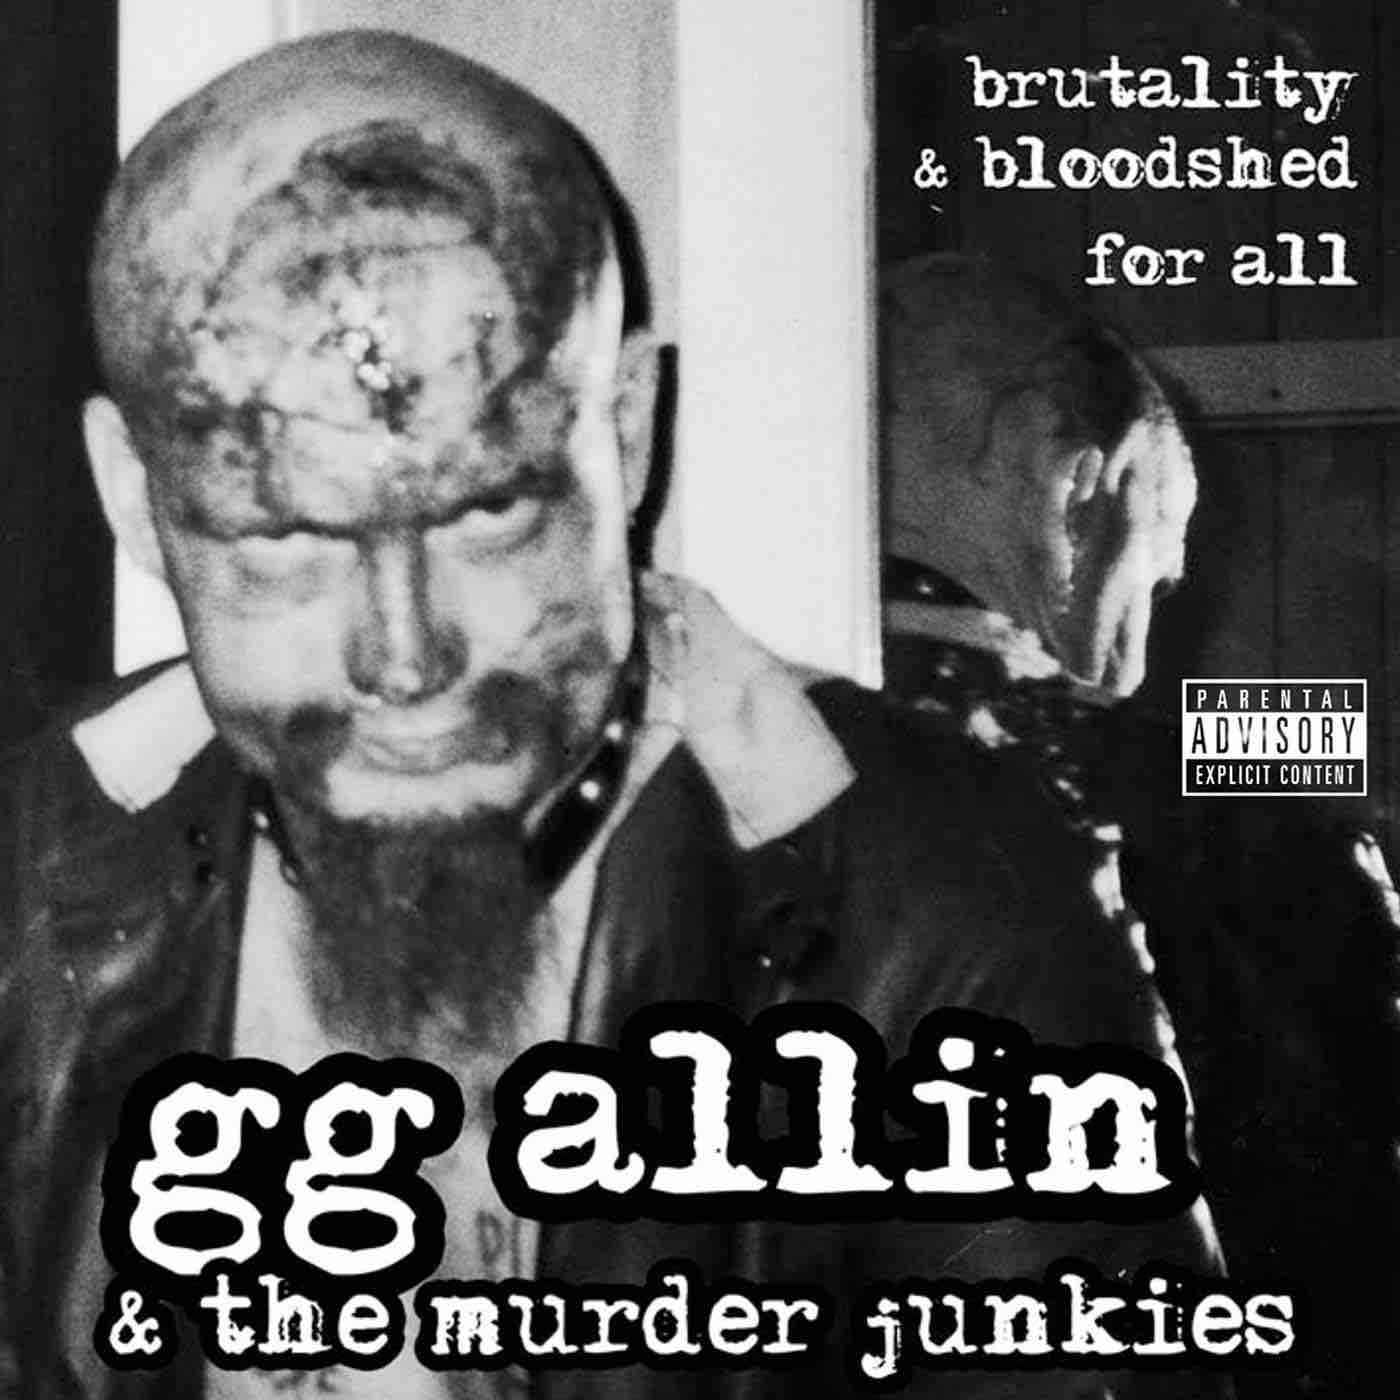 GG Allin & The Murder Junkies - Brutality & Bloodshed For All LP